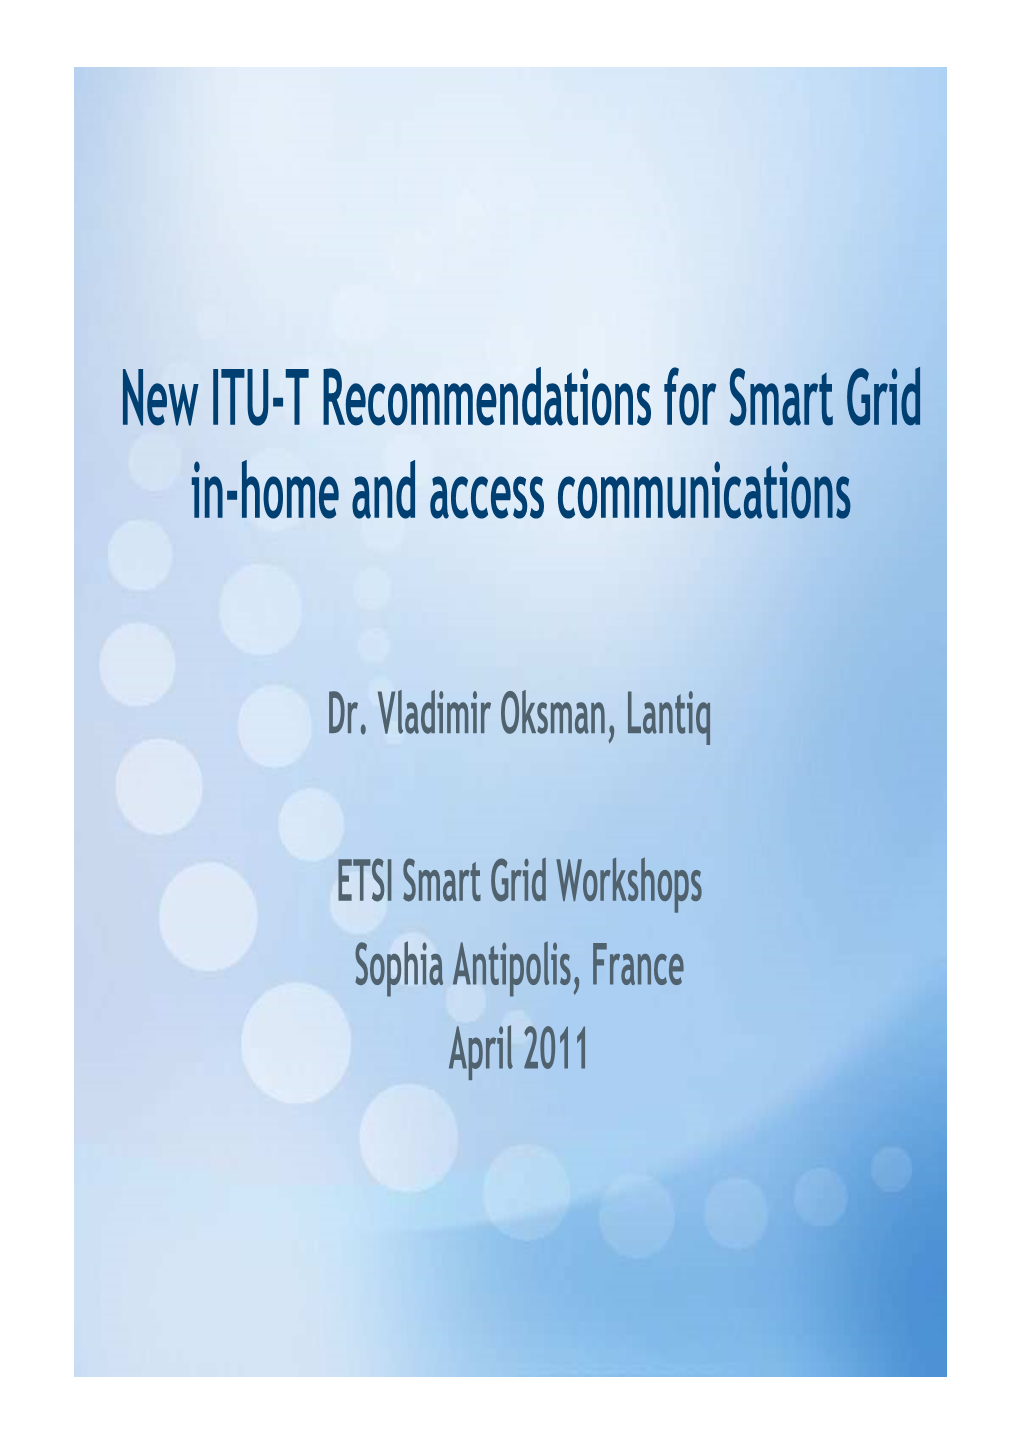 New ITU-T Recommendations for Smart Grid In-Home and Access Communications